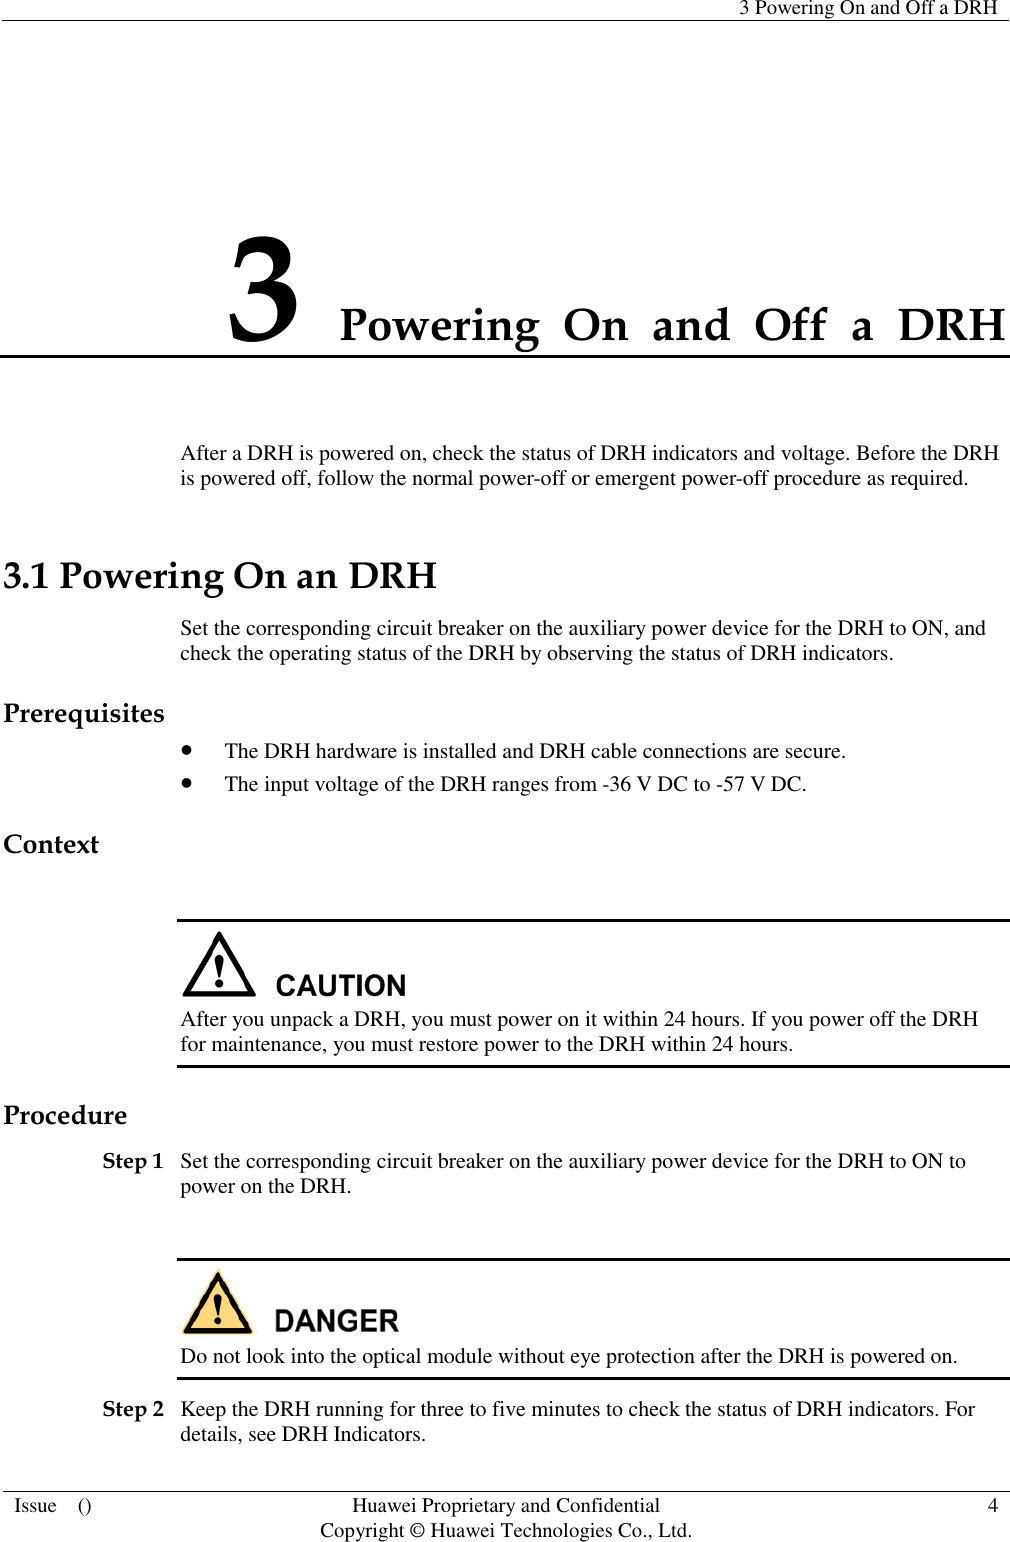   3 Powering On and Off a DRH  Issue    () Huawei Proprietary and Confidential                                     Copyright © Huawei Technologies Co., Ltd. 4  3 Powering  On  and  Off  a  DRH After a DRH is powered on, check the status of DRH indicators and voltage. Before the DRH is powered off, follow the normal power-off or emergent power-off procedure as required. 3.1 Powering On an DRH Set the corresponding circuit breaker on the auxiliary power device for the DRH to ON, and check the operating status of the DRH by observing the status of DRH indicators. Prerequisites  The DRH hardware is installed and DRH cable connections are secure.  The input voltage of the DRH ranges from -36 V DC to -57 V DC. Context   After you unpack a DRH, you must power on it within 24 hours. If you power off the DRH for maintenance, you must restore power to the DRH within 24 hours. Procedure Step 1 Set the corresponding circuit breaker on the auxiliary power device for the DRH to ON to power on the DRH.   Do not look into the optical module without eye protection after the DRH is powered on. Step 2 Keep the DRH running for three to five minutes to check the status of DRH indicators. For details, see DRH Indicators. 